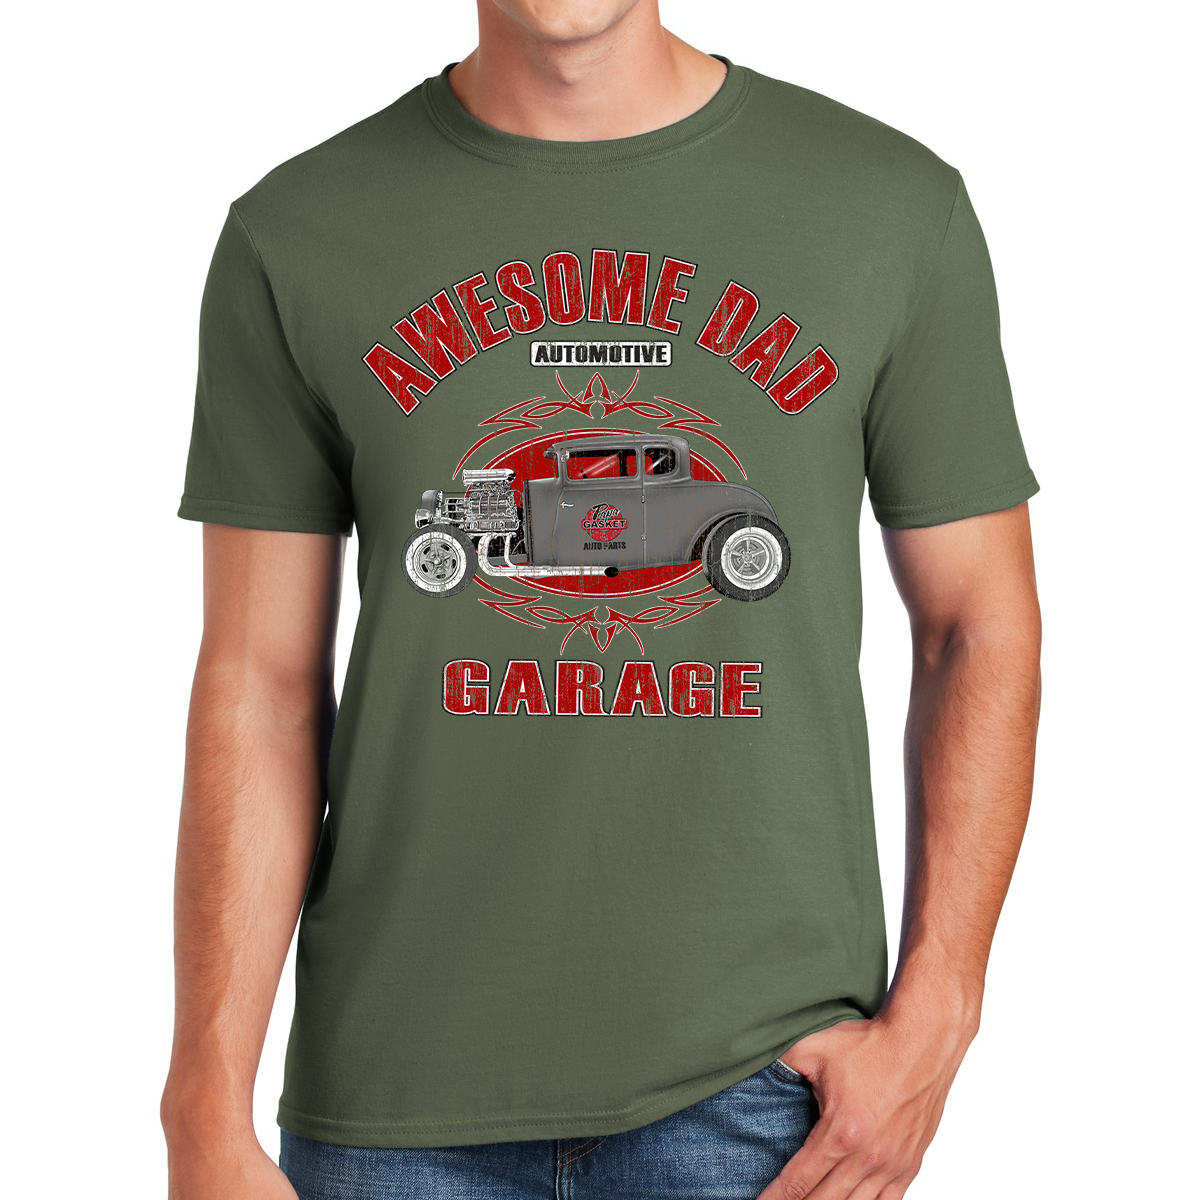 Awesome Dad Hot Rod Garage Revving Up Fatherhood With Style Gift For Dads T-shirt